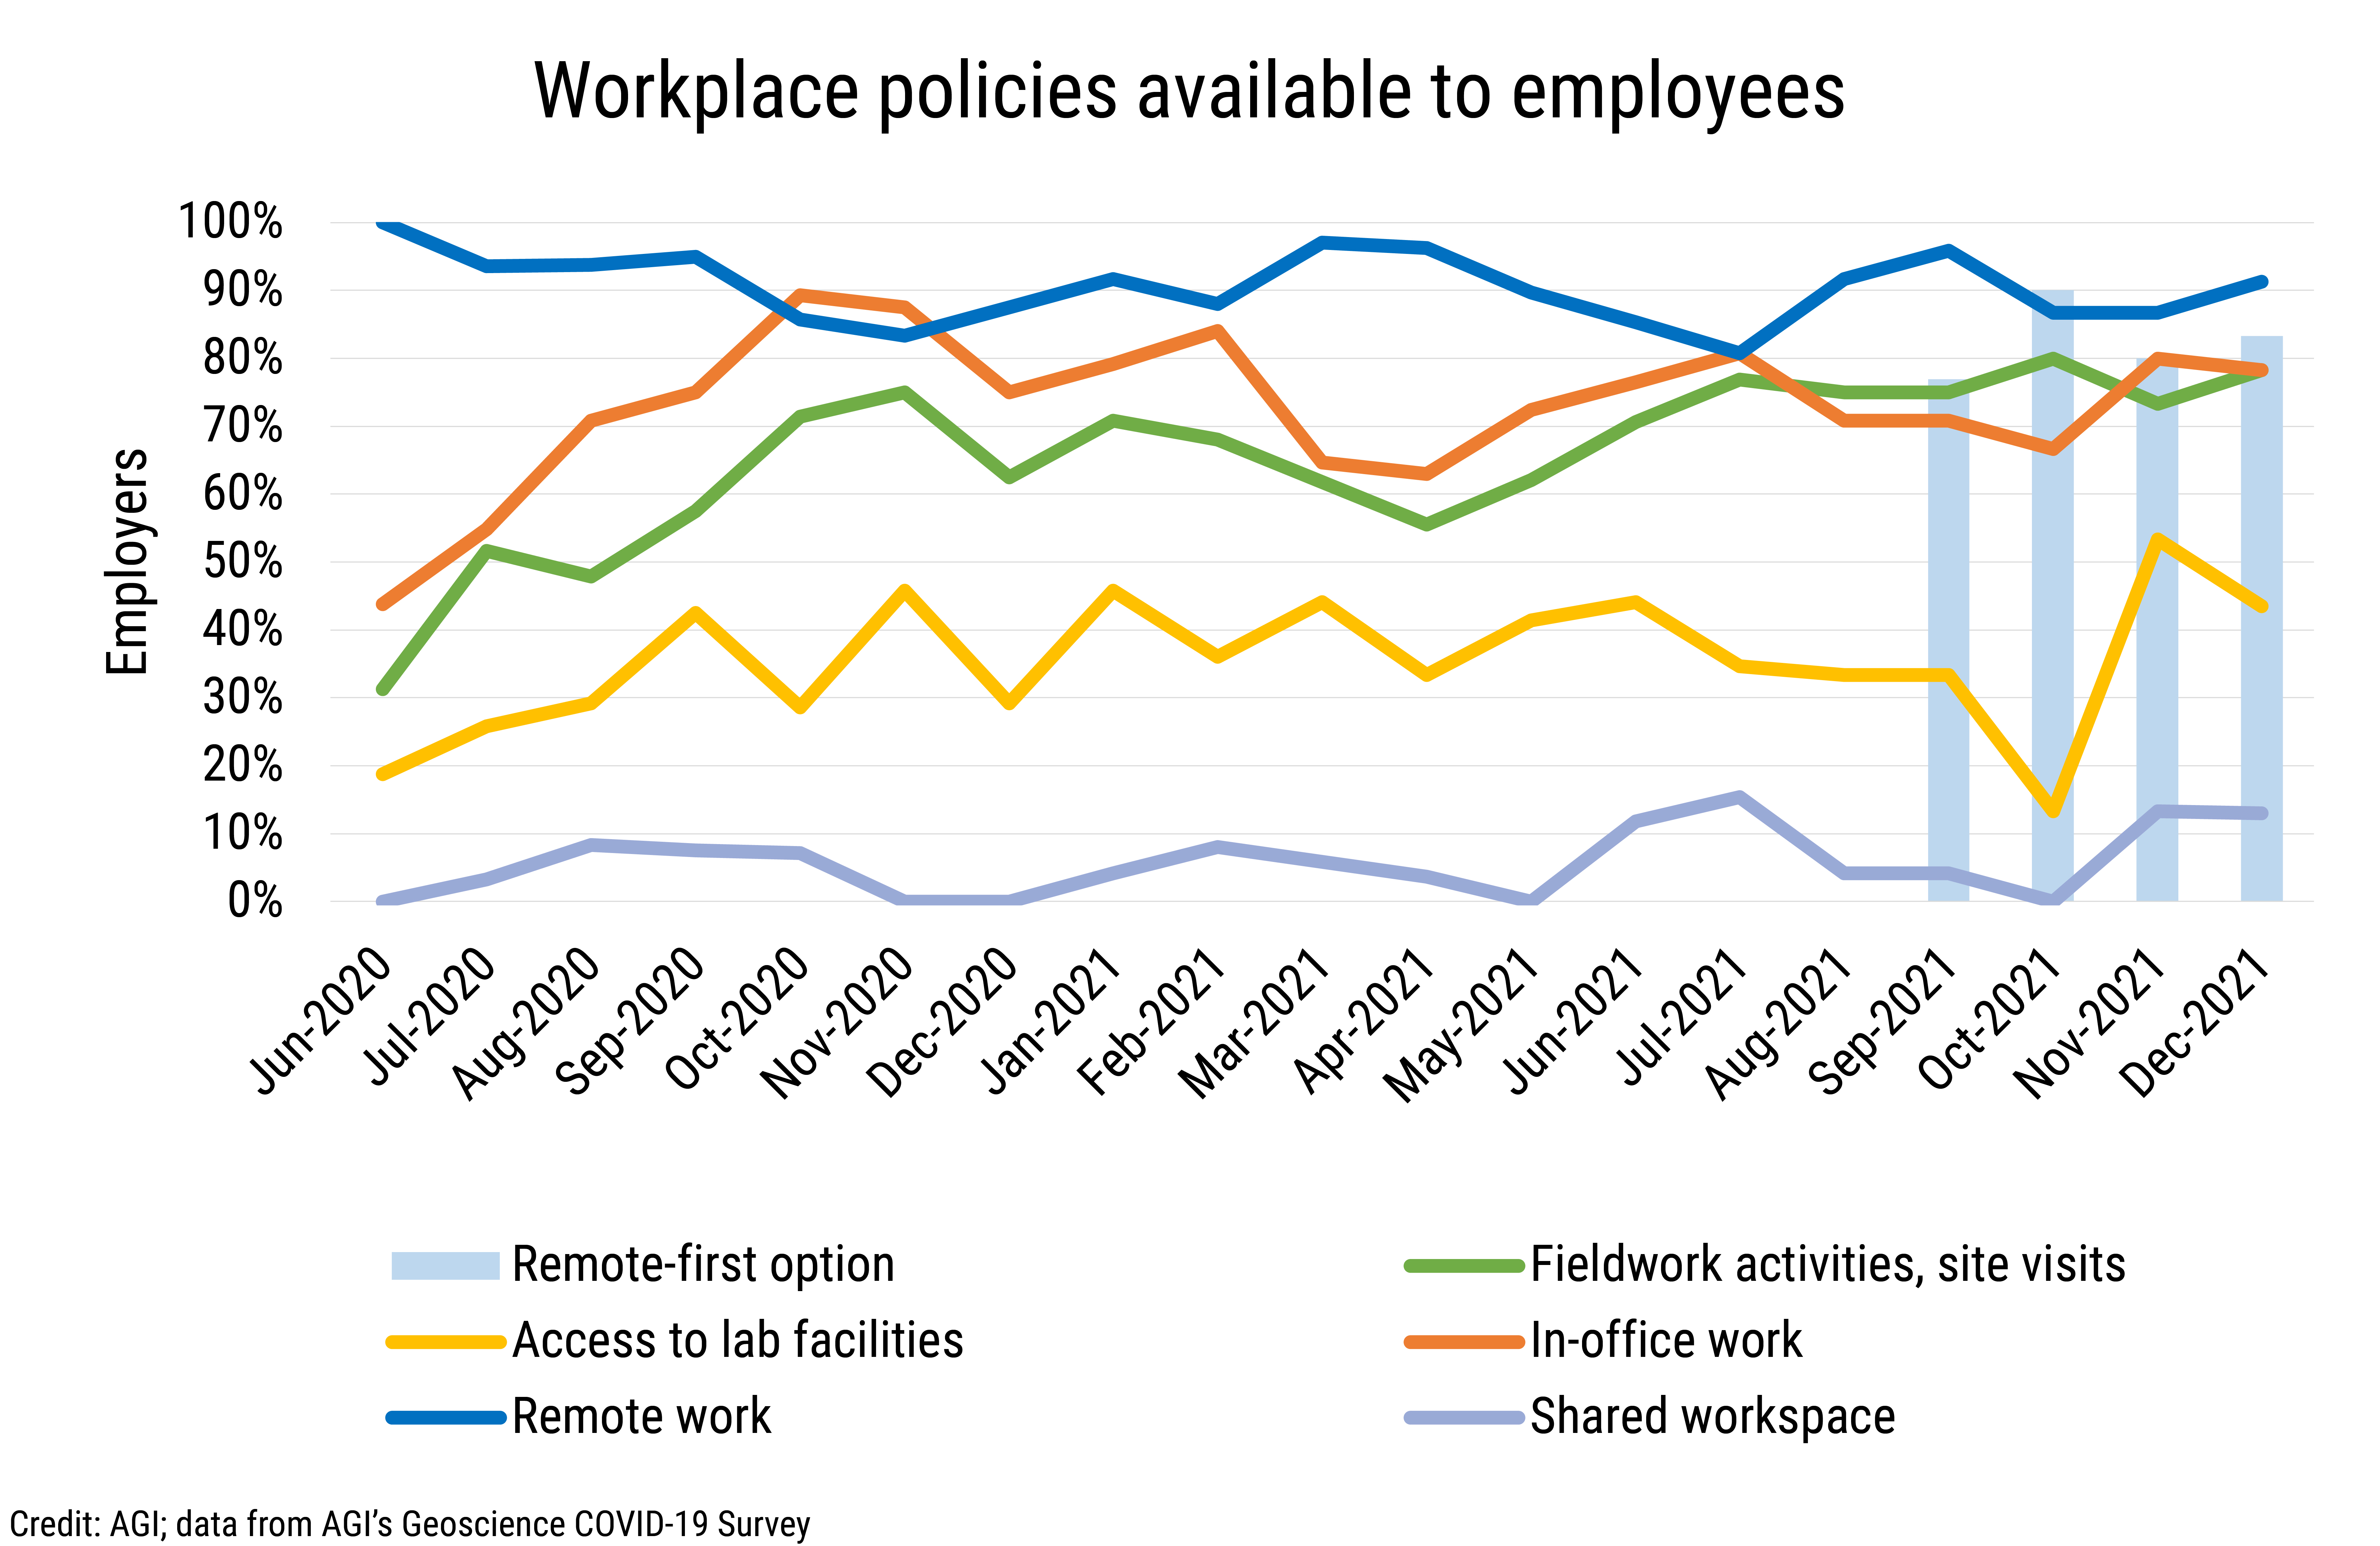 DB_2022-003 chart 05: Workplace policies available to employees (Credit: AGI; data from AGI&#039;s Geoscience COVID-19 Survey)